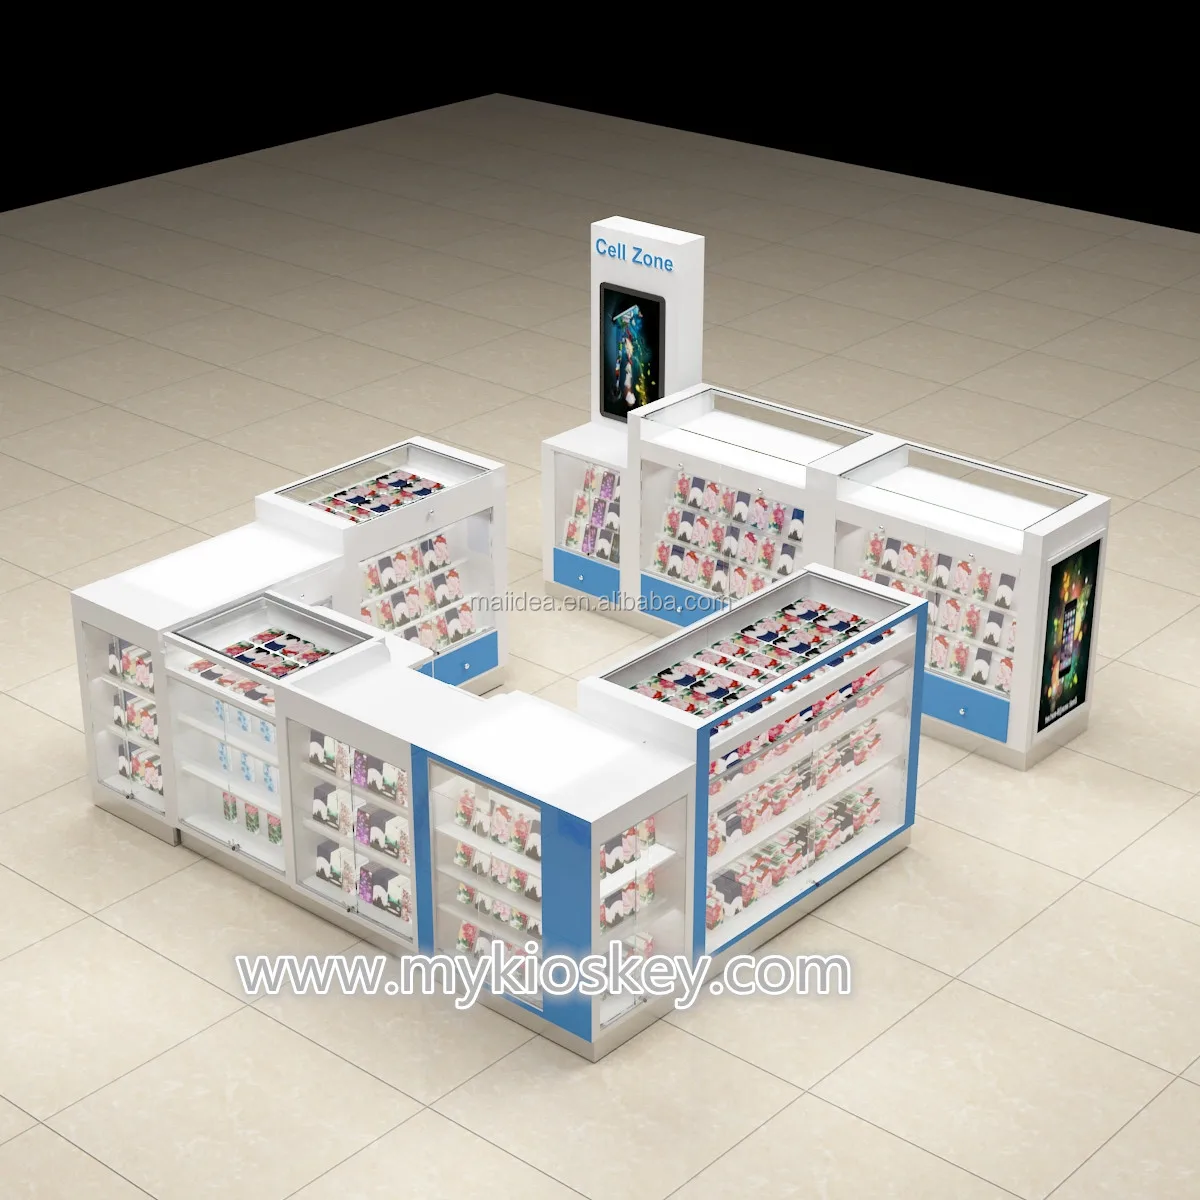 cell phone accessories display kiosk  